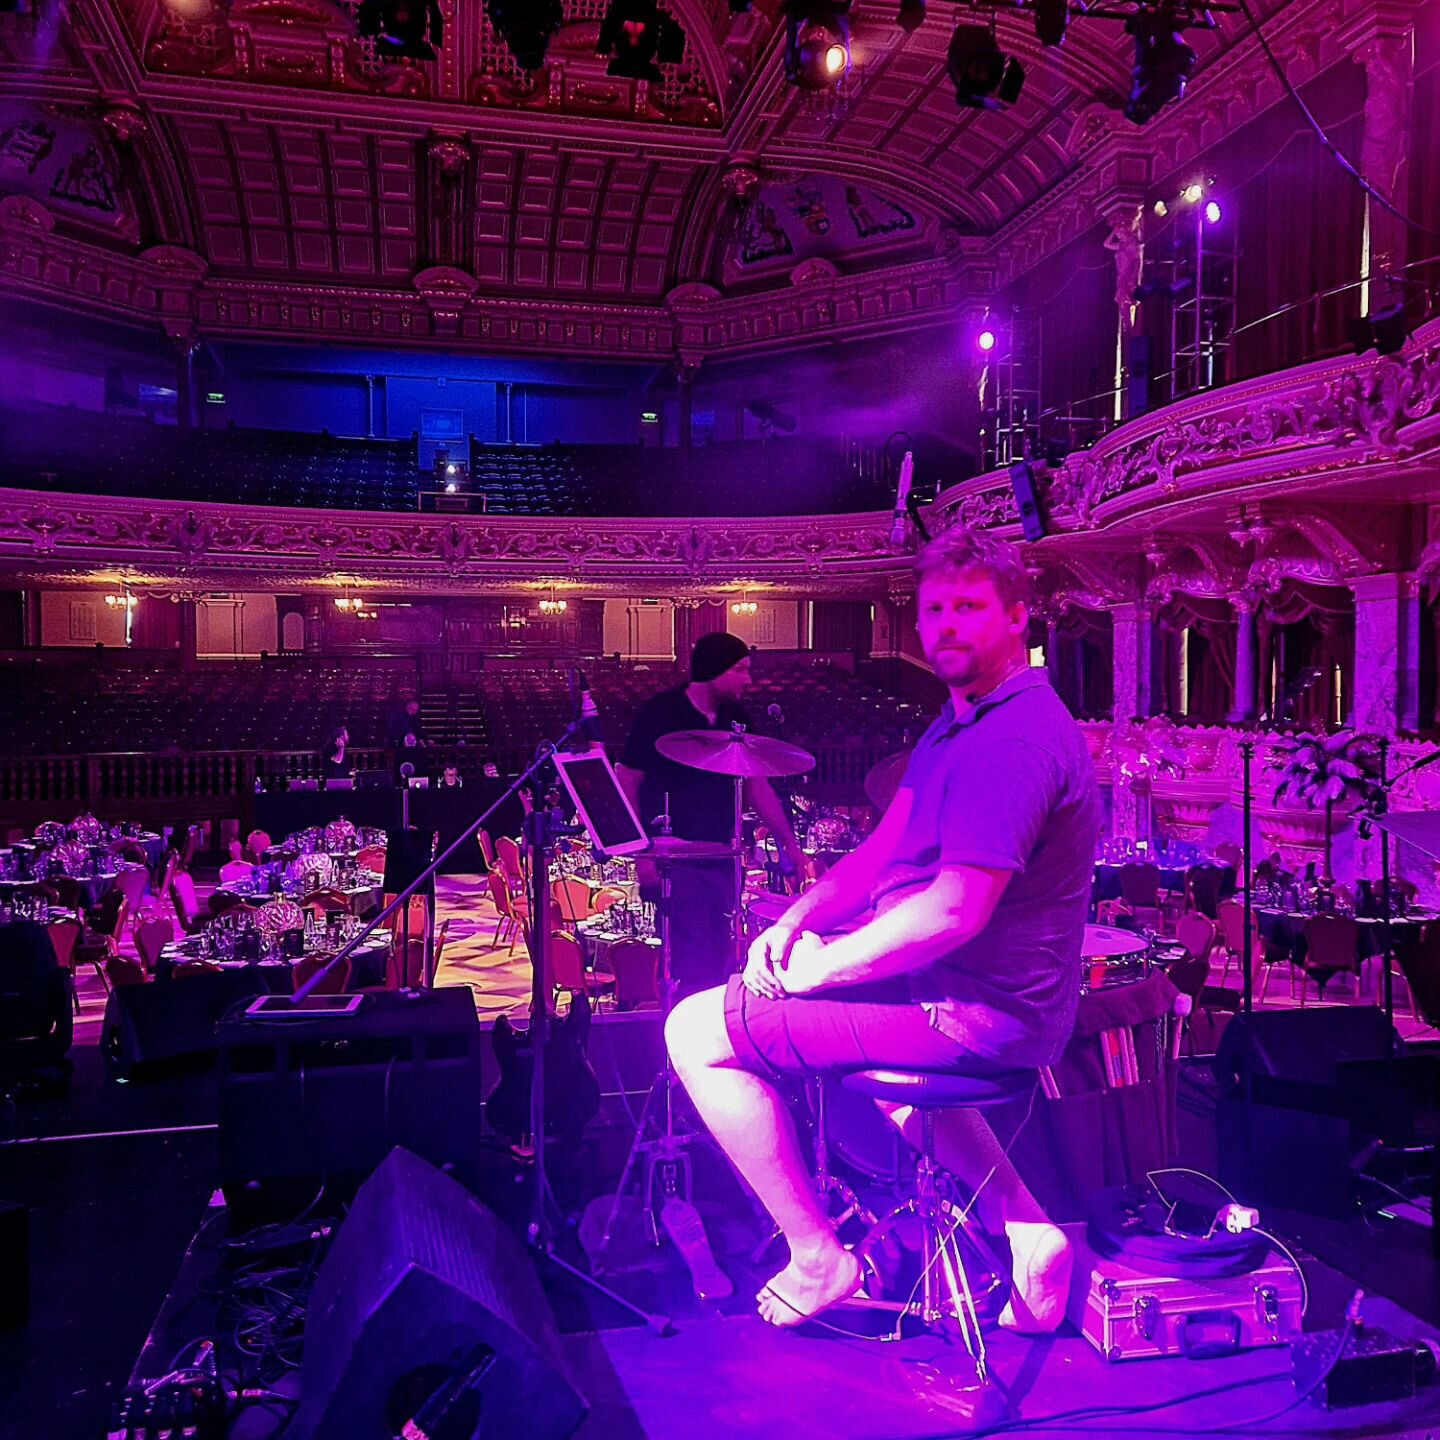 Nice to get some #corporate #events in over summer - Cracking venue up in Harrogate for POTY (we still don't know what that means 😉)
.
.
.
.
.
.
.
#singer #musician #drummer #corporate  #corporatestyle #party #events #eventplanner #weddings #eventpl